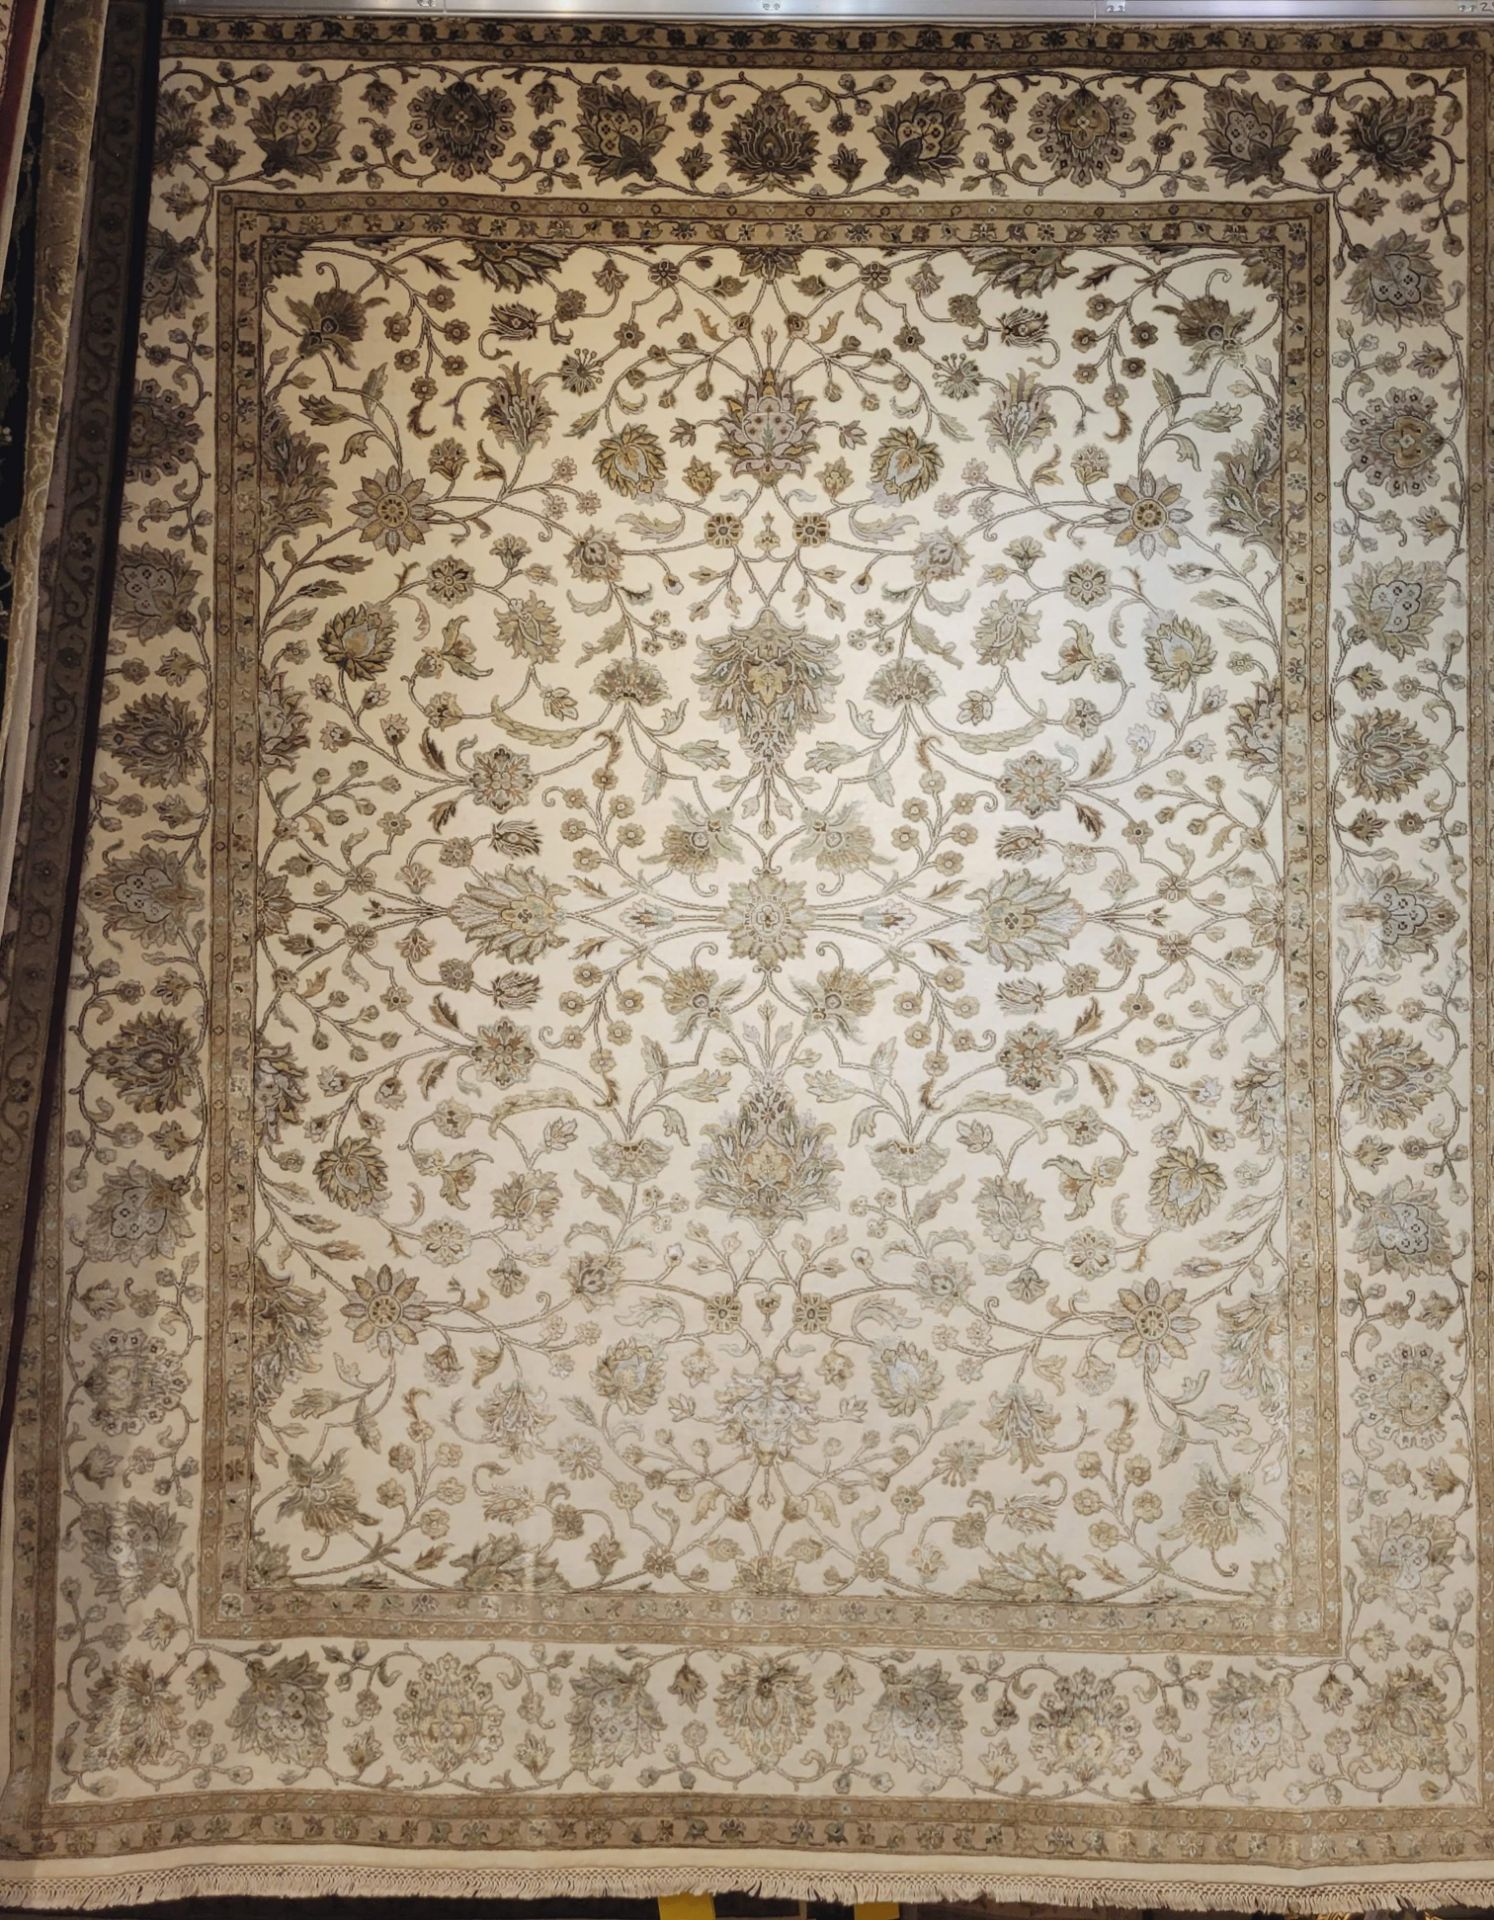 8'3" X 10' PWI/PWI - WOOL/ART. SILK HAND KNOTTED IN INDIA - MSRP $12,475.00 (LOCATED IN GALLERY